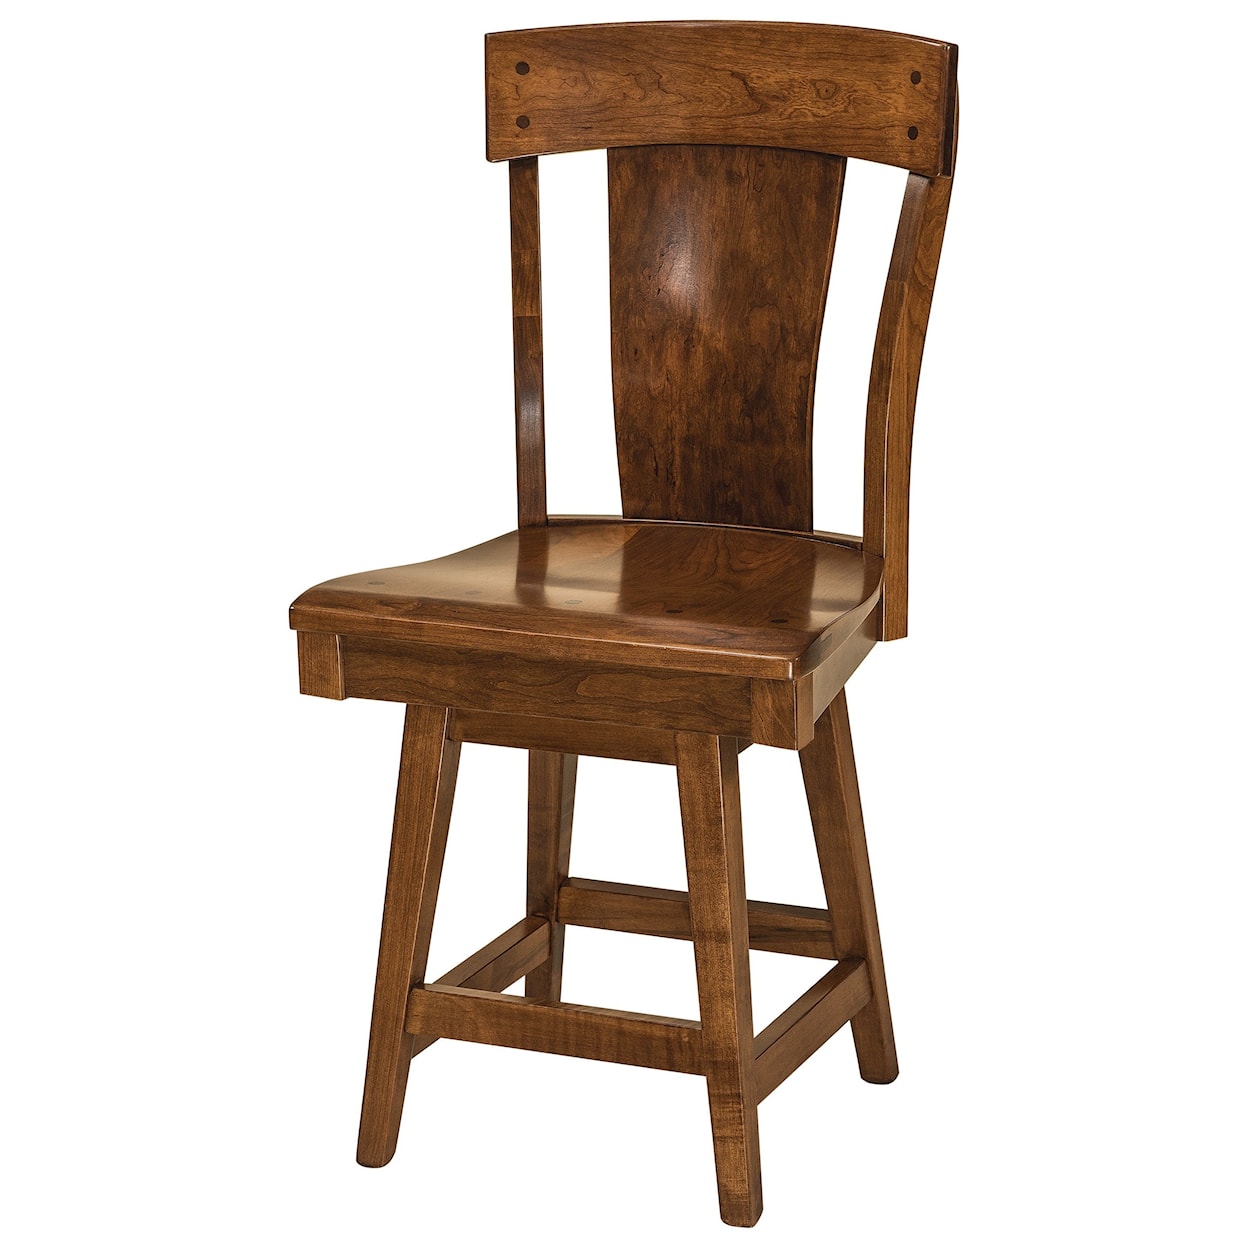 F&N Woodworking Lacombe Swivel Counter Height Stool - Wood Seat